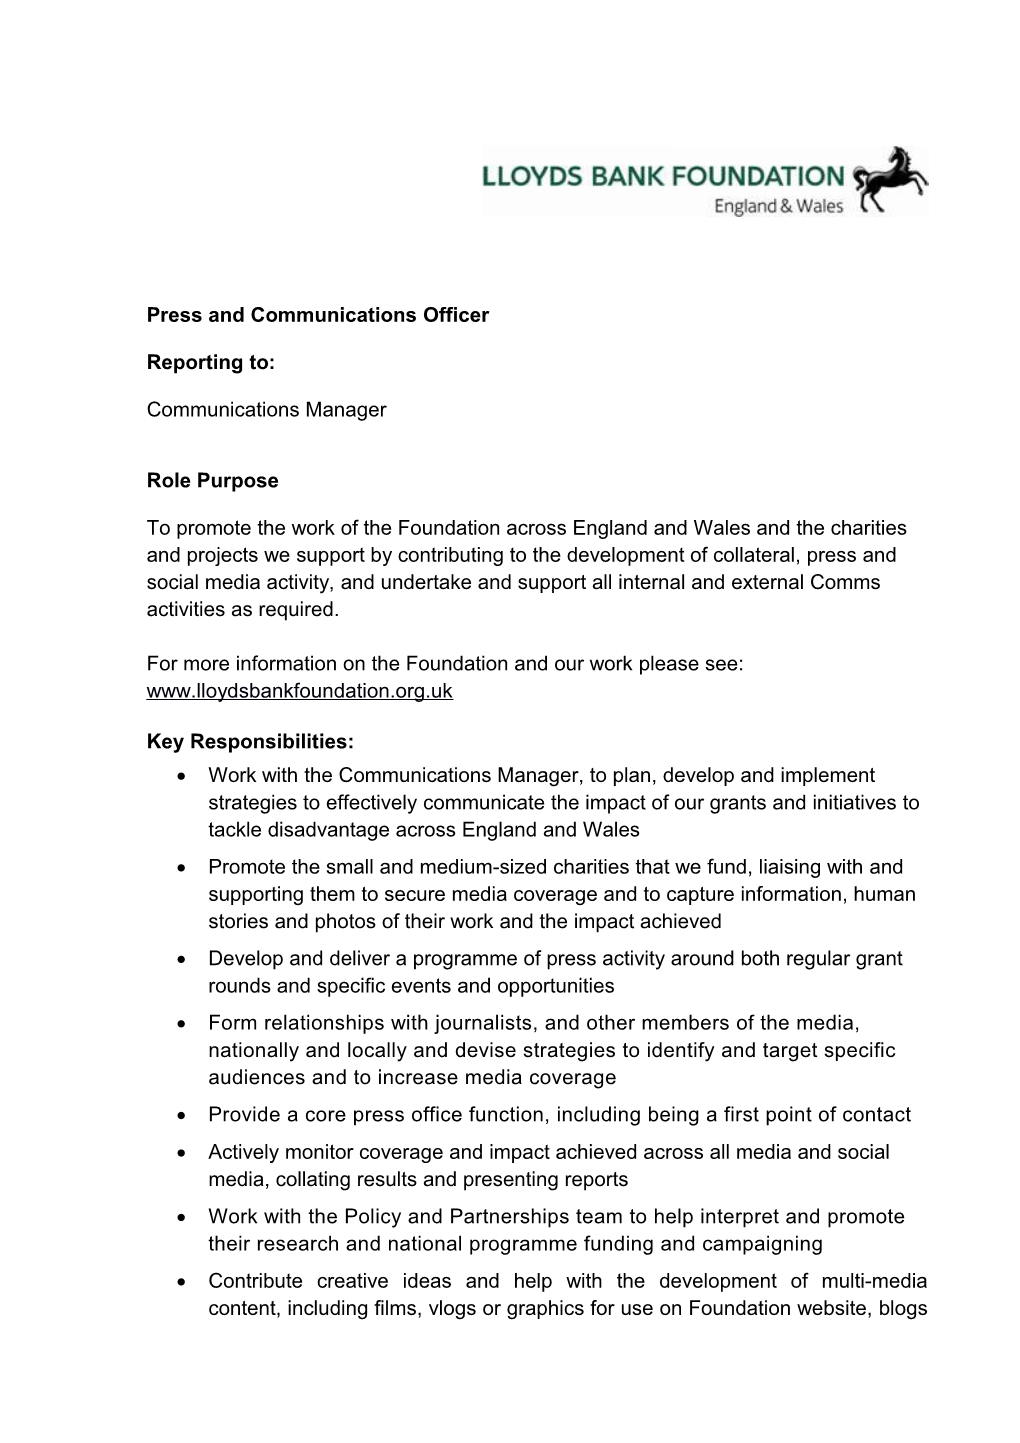 Work with the Communications Manager, to Plan, Develop and Implement Strategies to Effectively